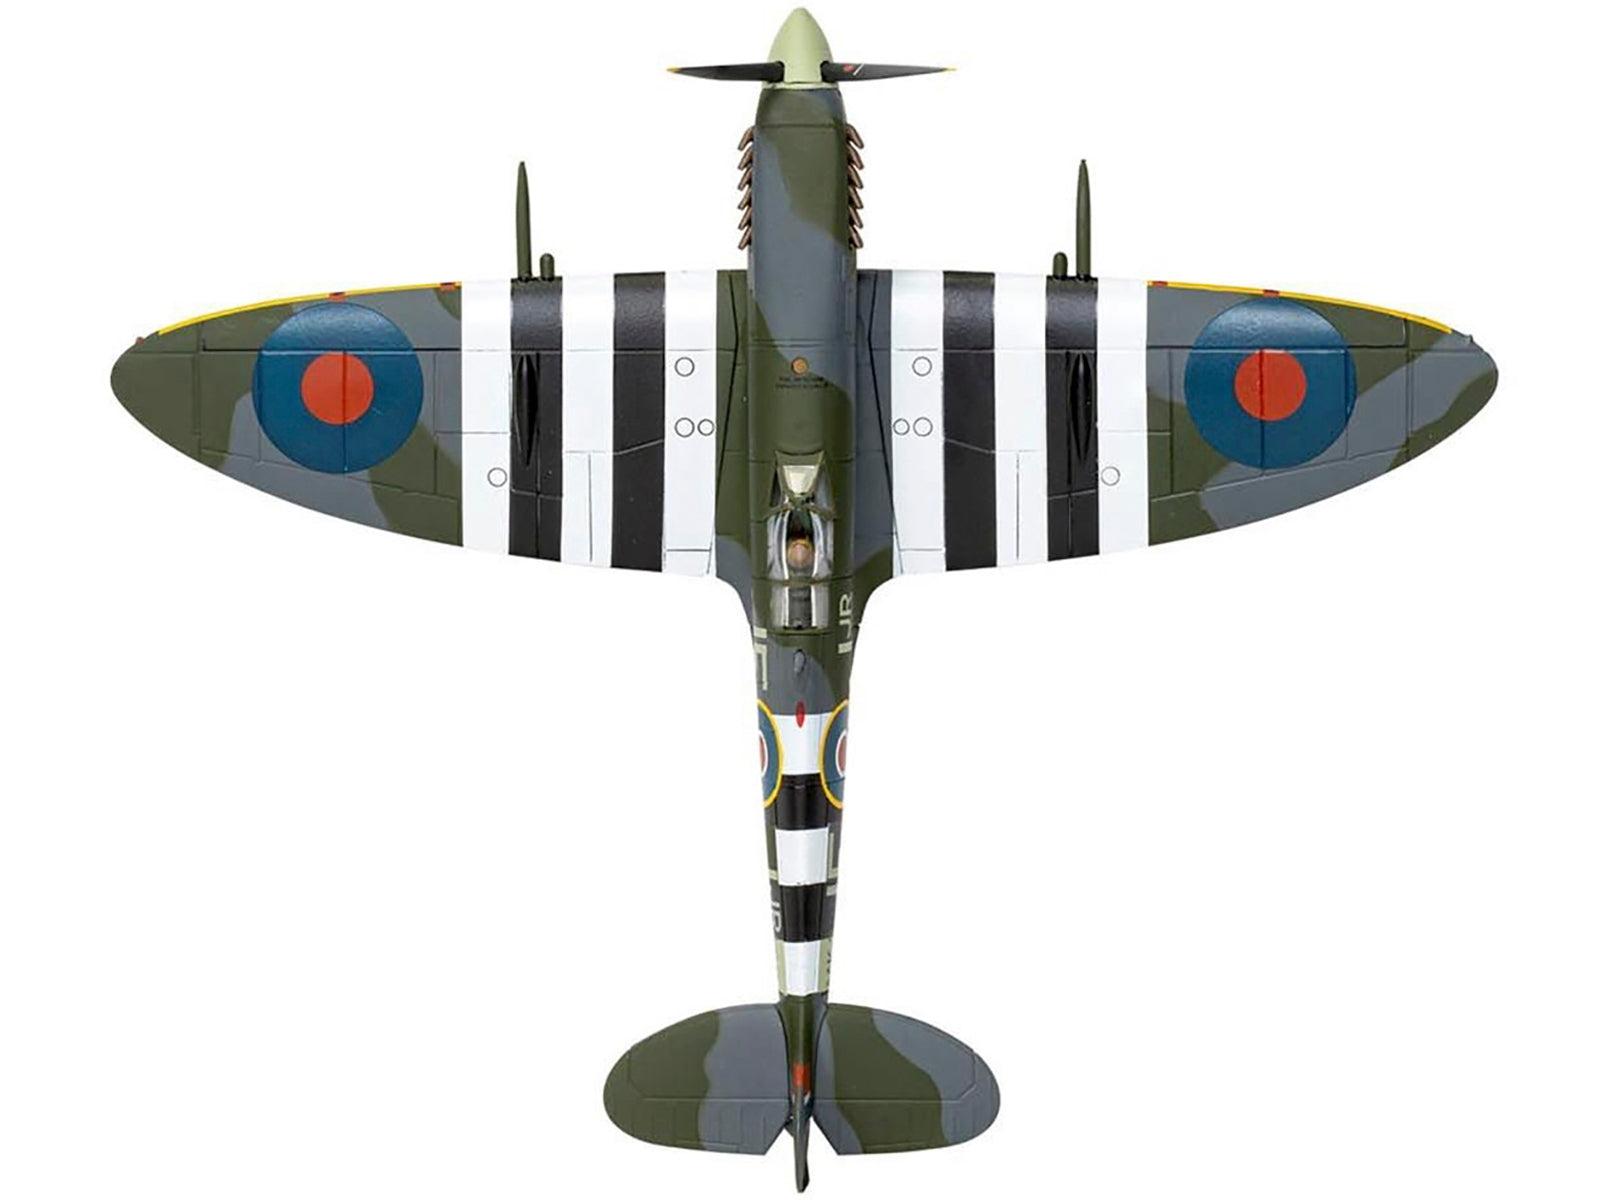 Supermarine Spitfire Mk.IX Fighter Aircraft with Commander J.E. "Johnnie" Johnson Figure 144 Wing RCAF